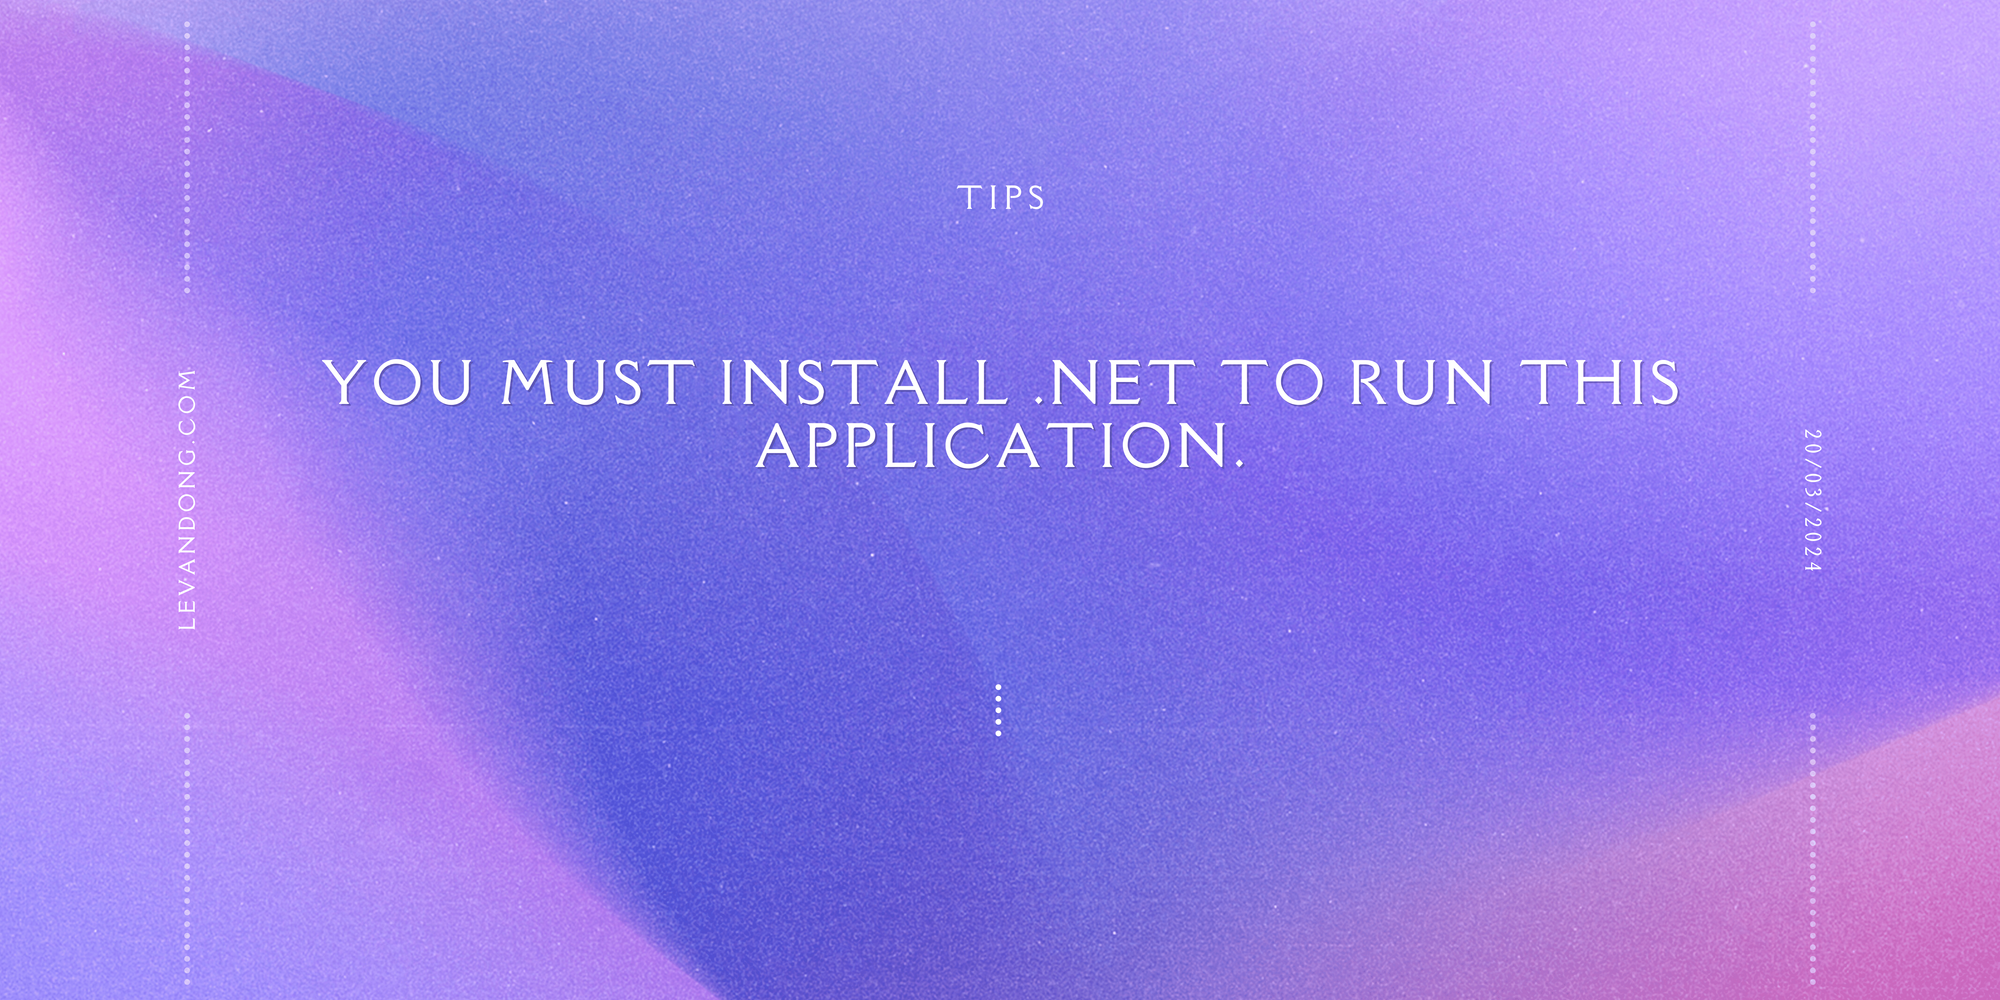 Fix issue dotnet "You must install .NET to run this application." runs in Rider Jetbrains